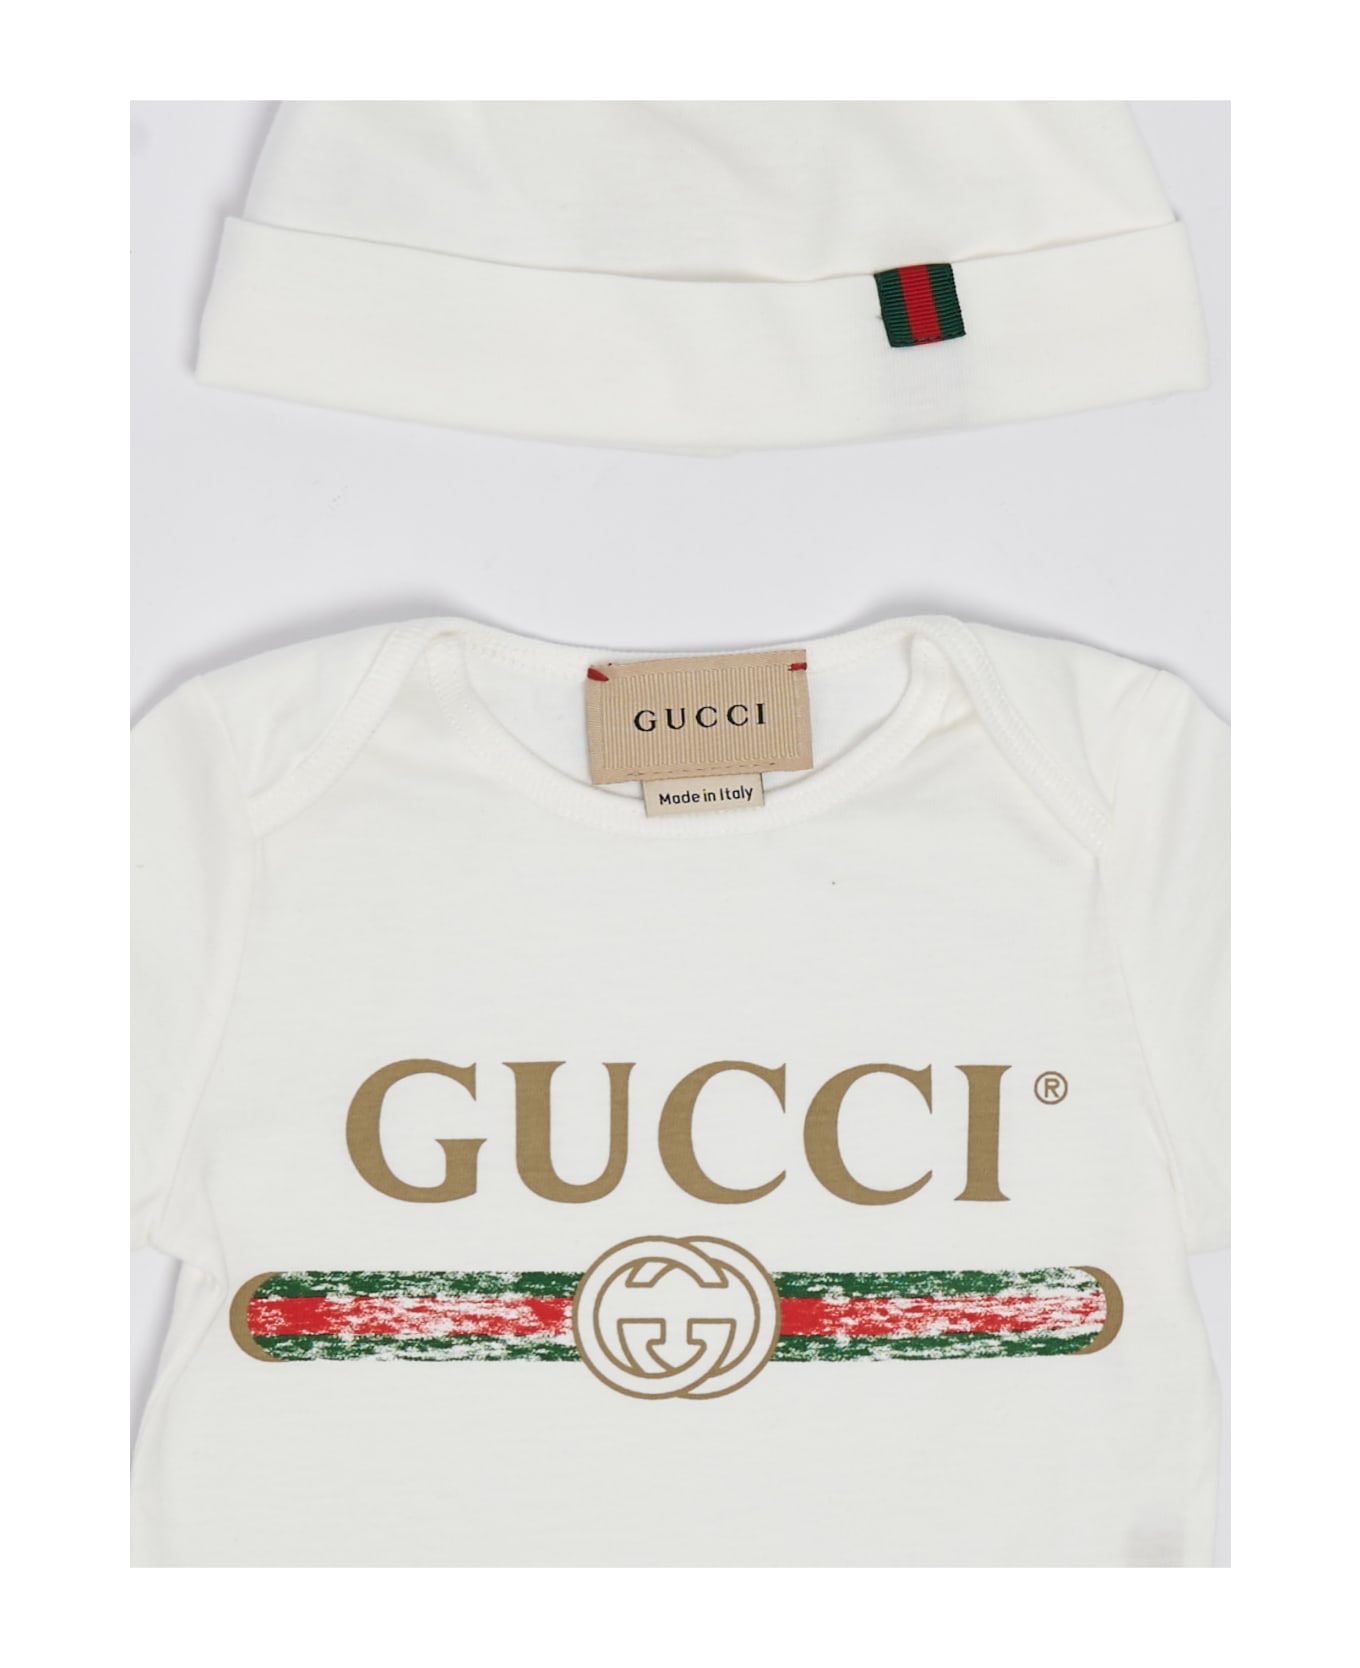 Gucci Gift Set Suit - BIANCO ボディスーツ＆セットアップ